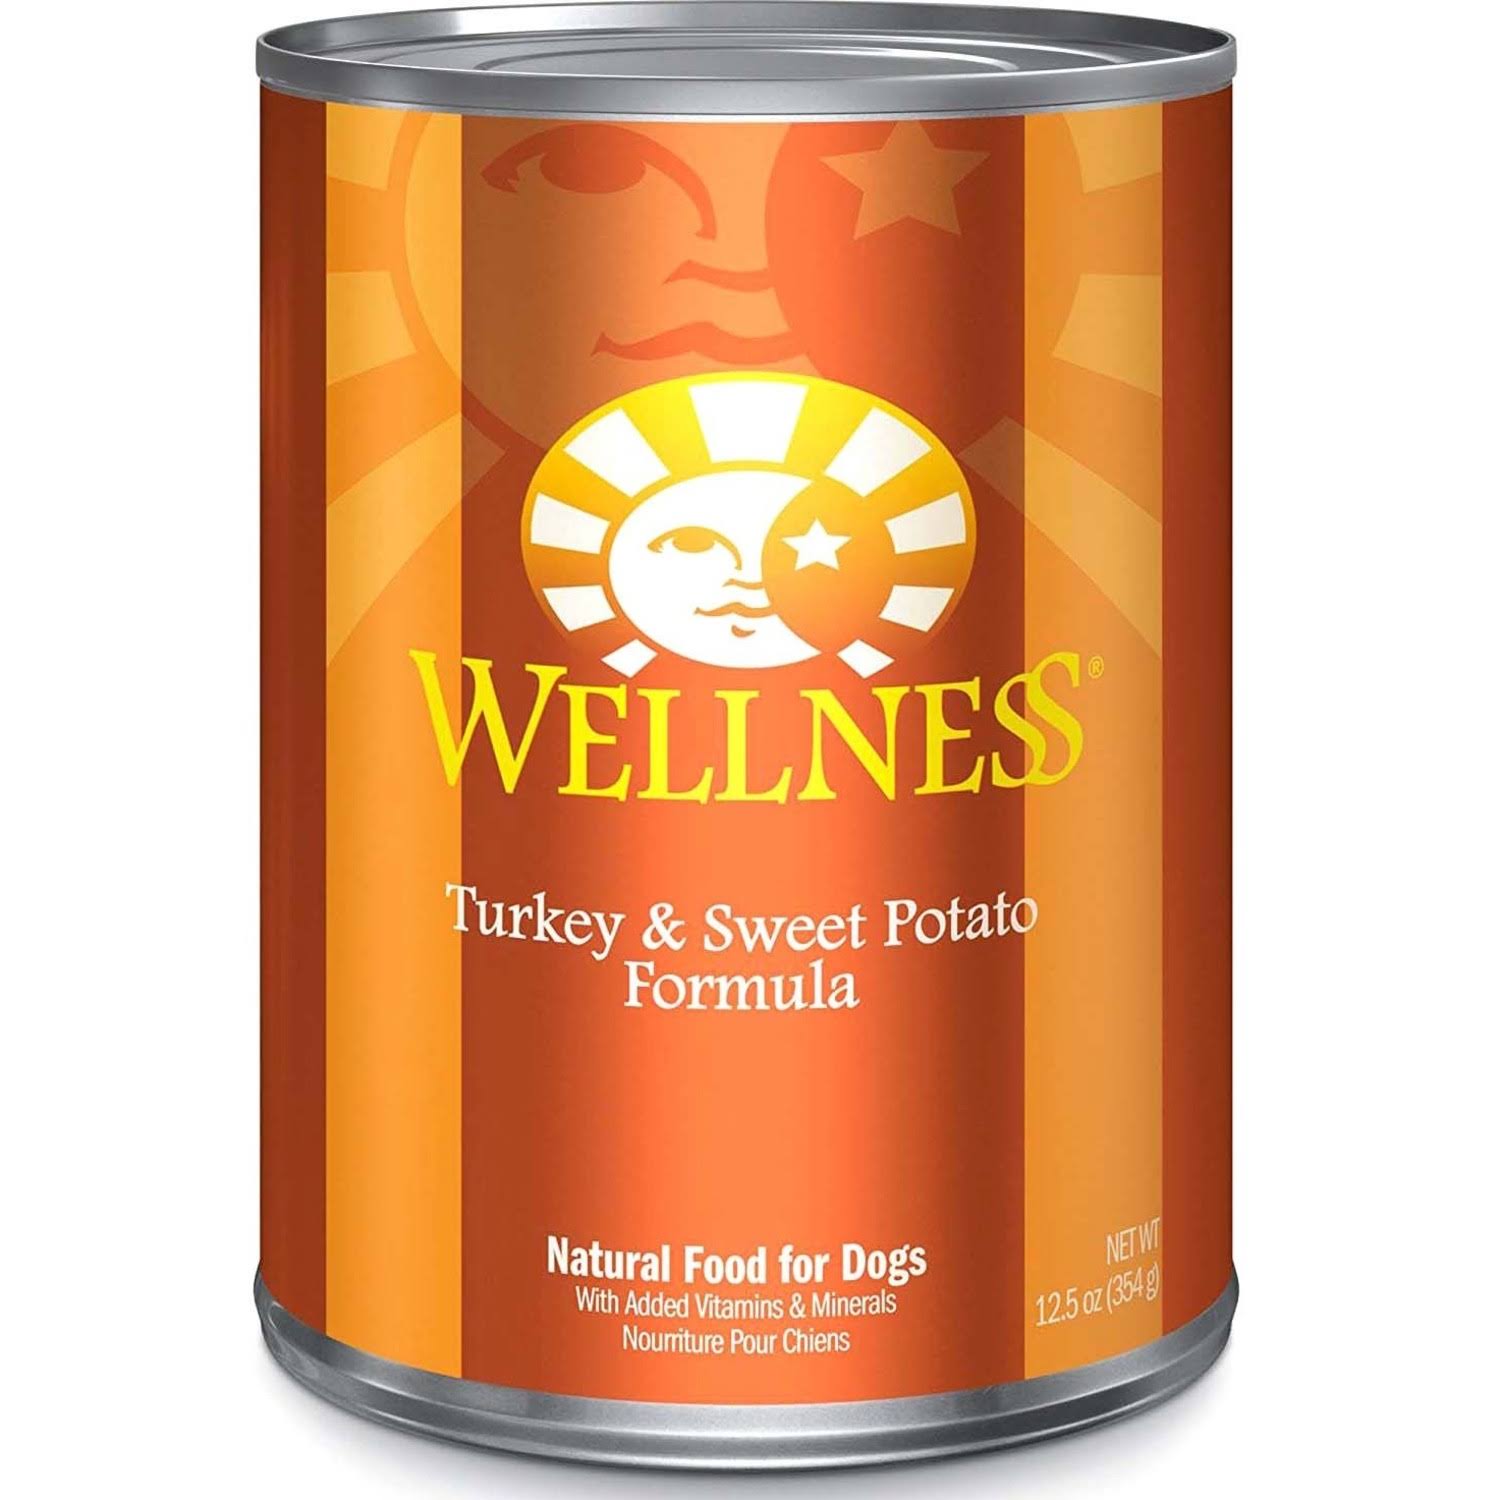 Wellness Canned Dog Food For Adult Dogs - Turkey And Sweet Potato Formula, 12-1/2oz